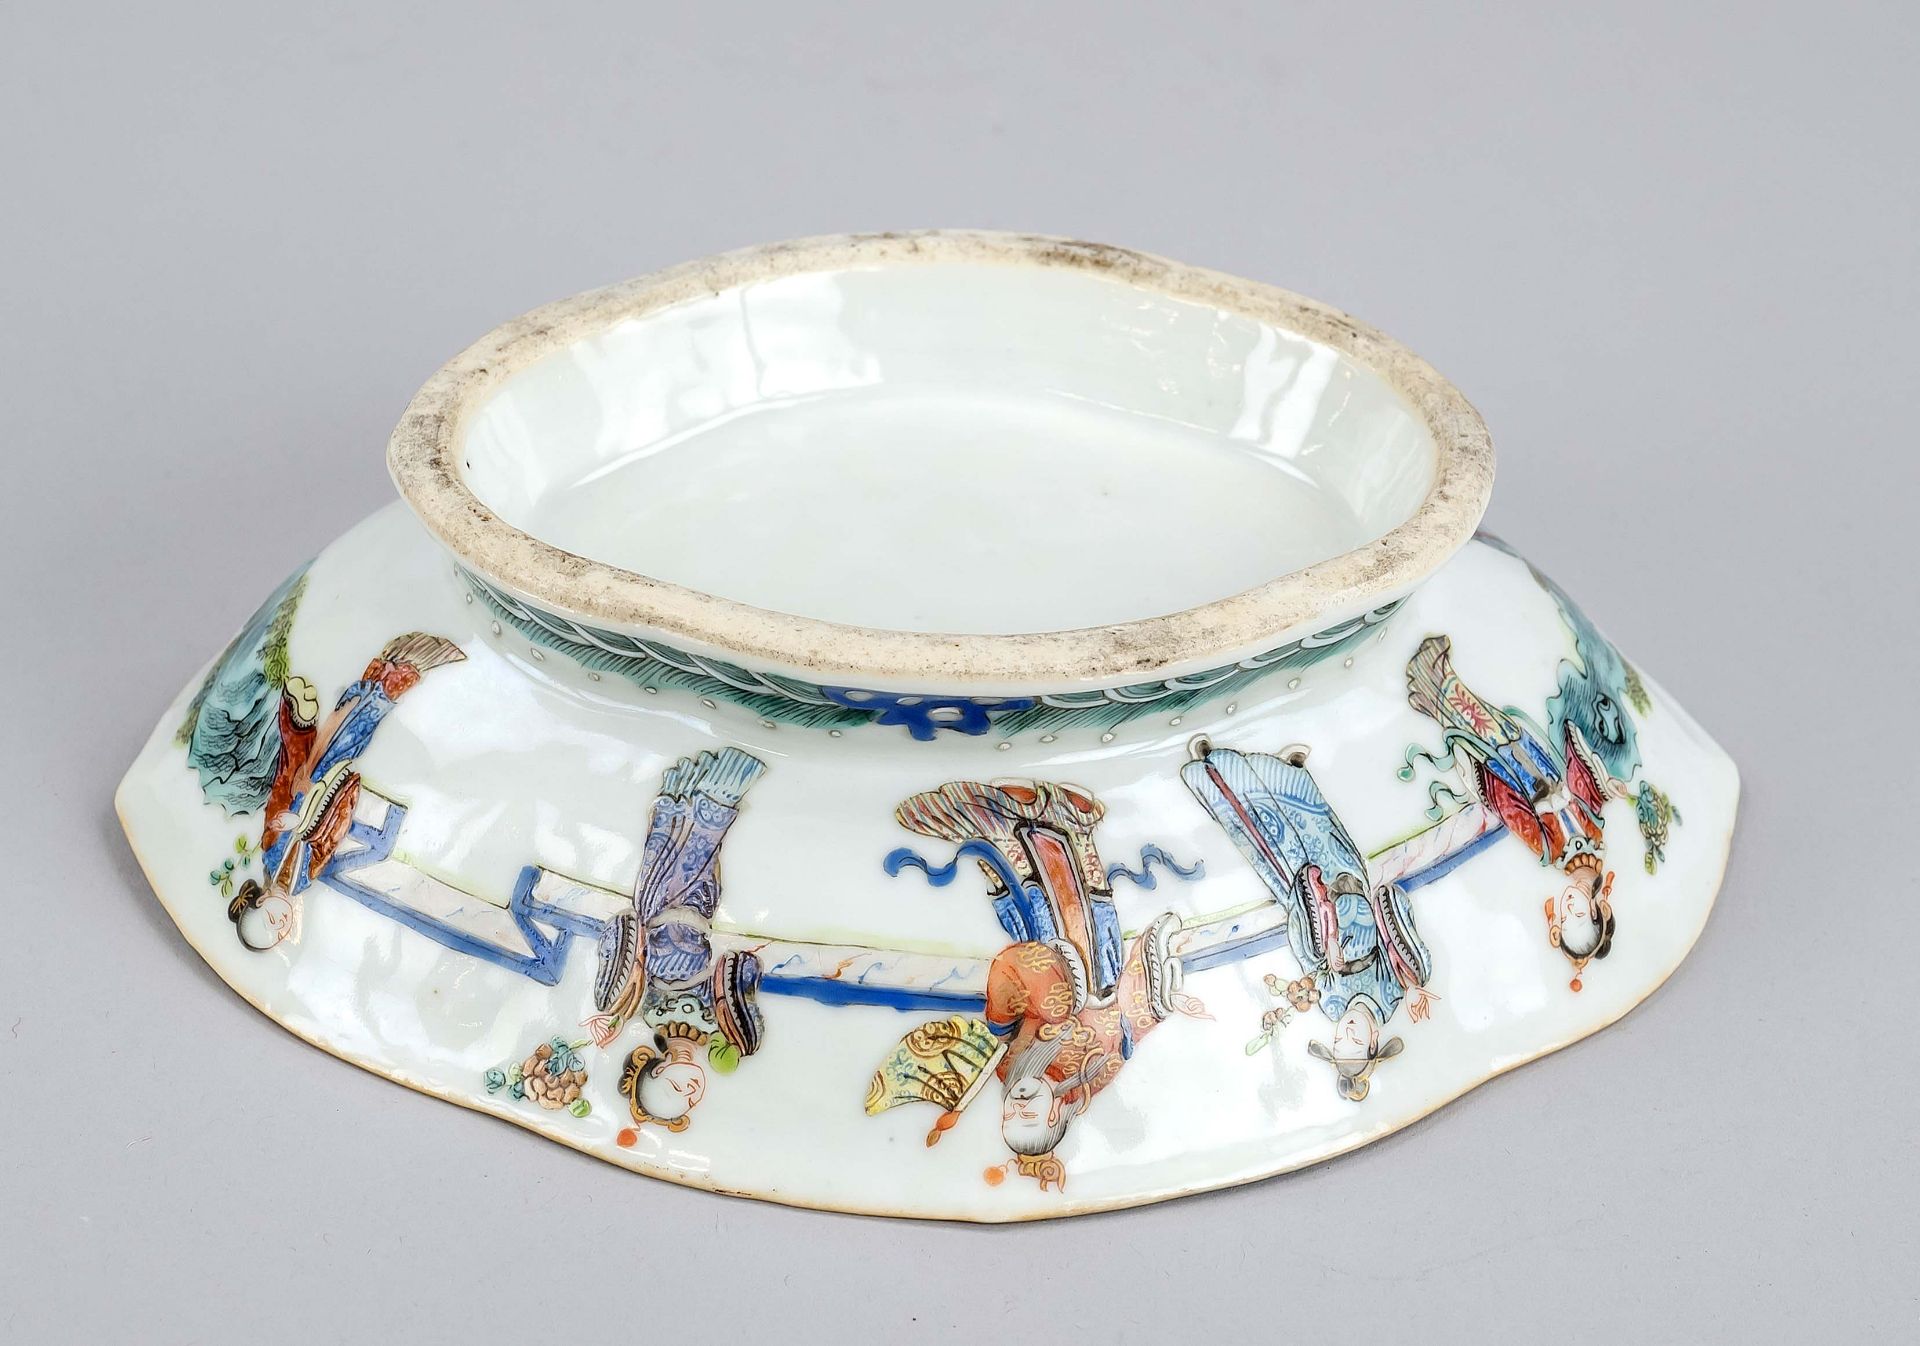 Four-pass foot bowl famille rose, China, Qing dynasty(1644-1911), porcelain with polychrome enamel - Image 2 of 2